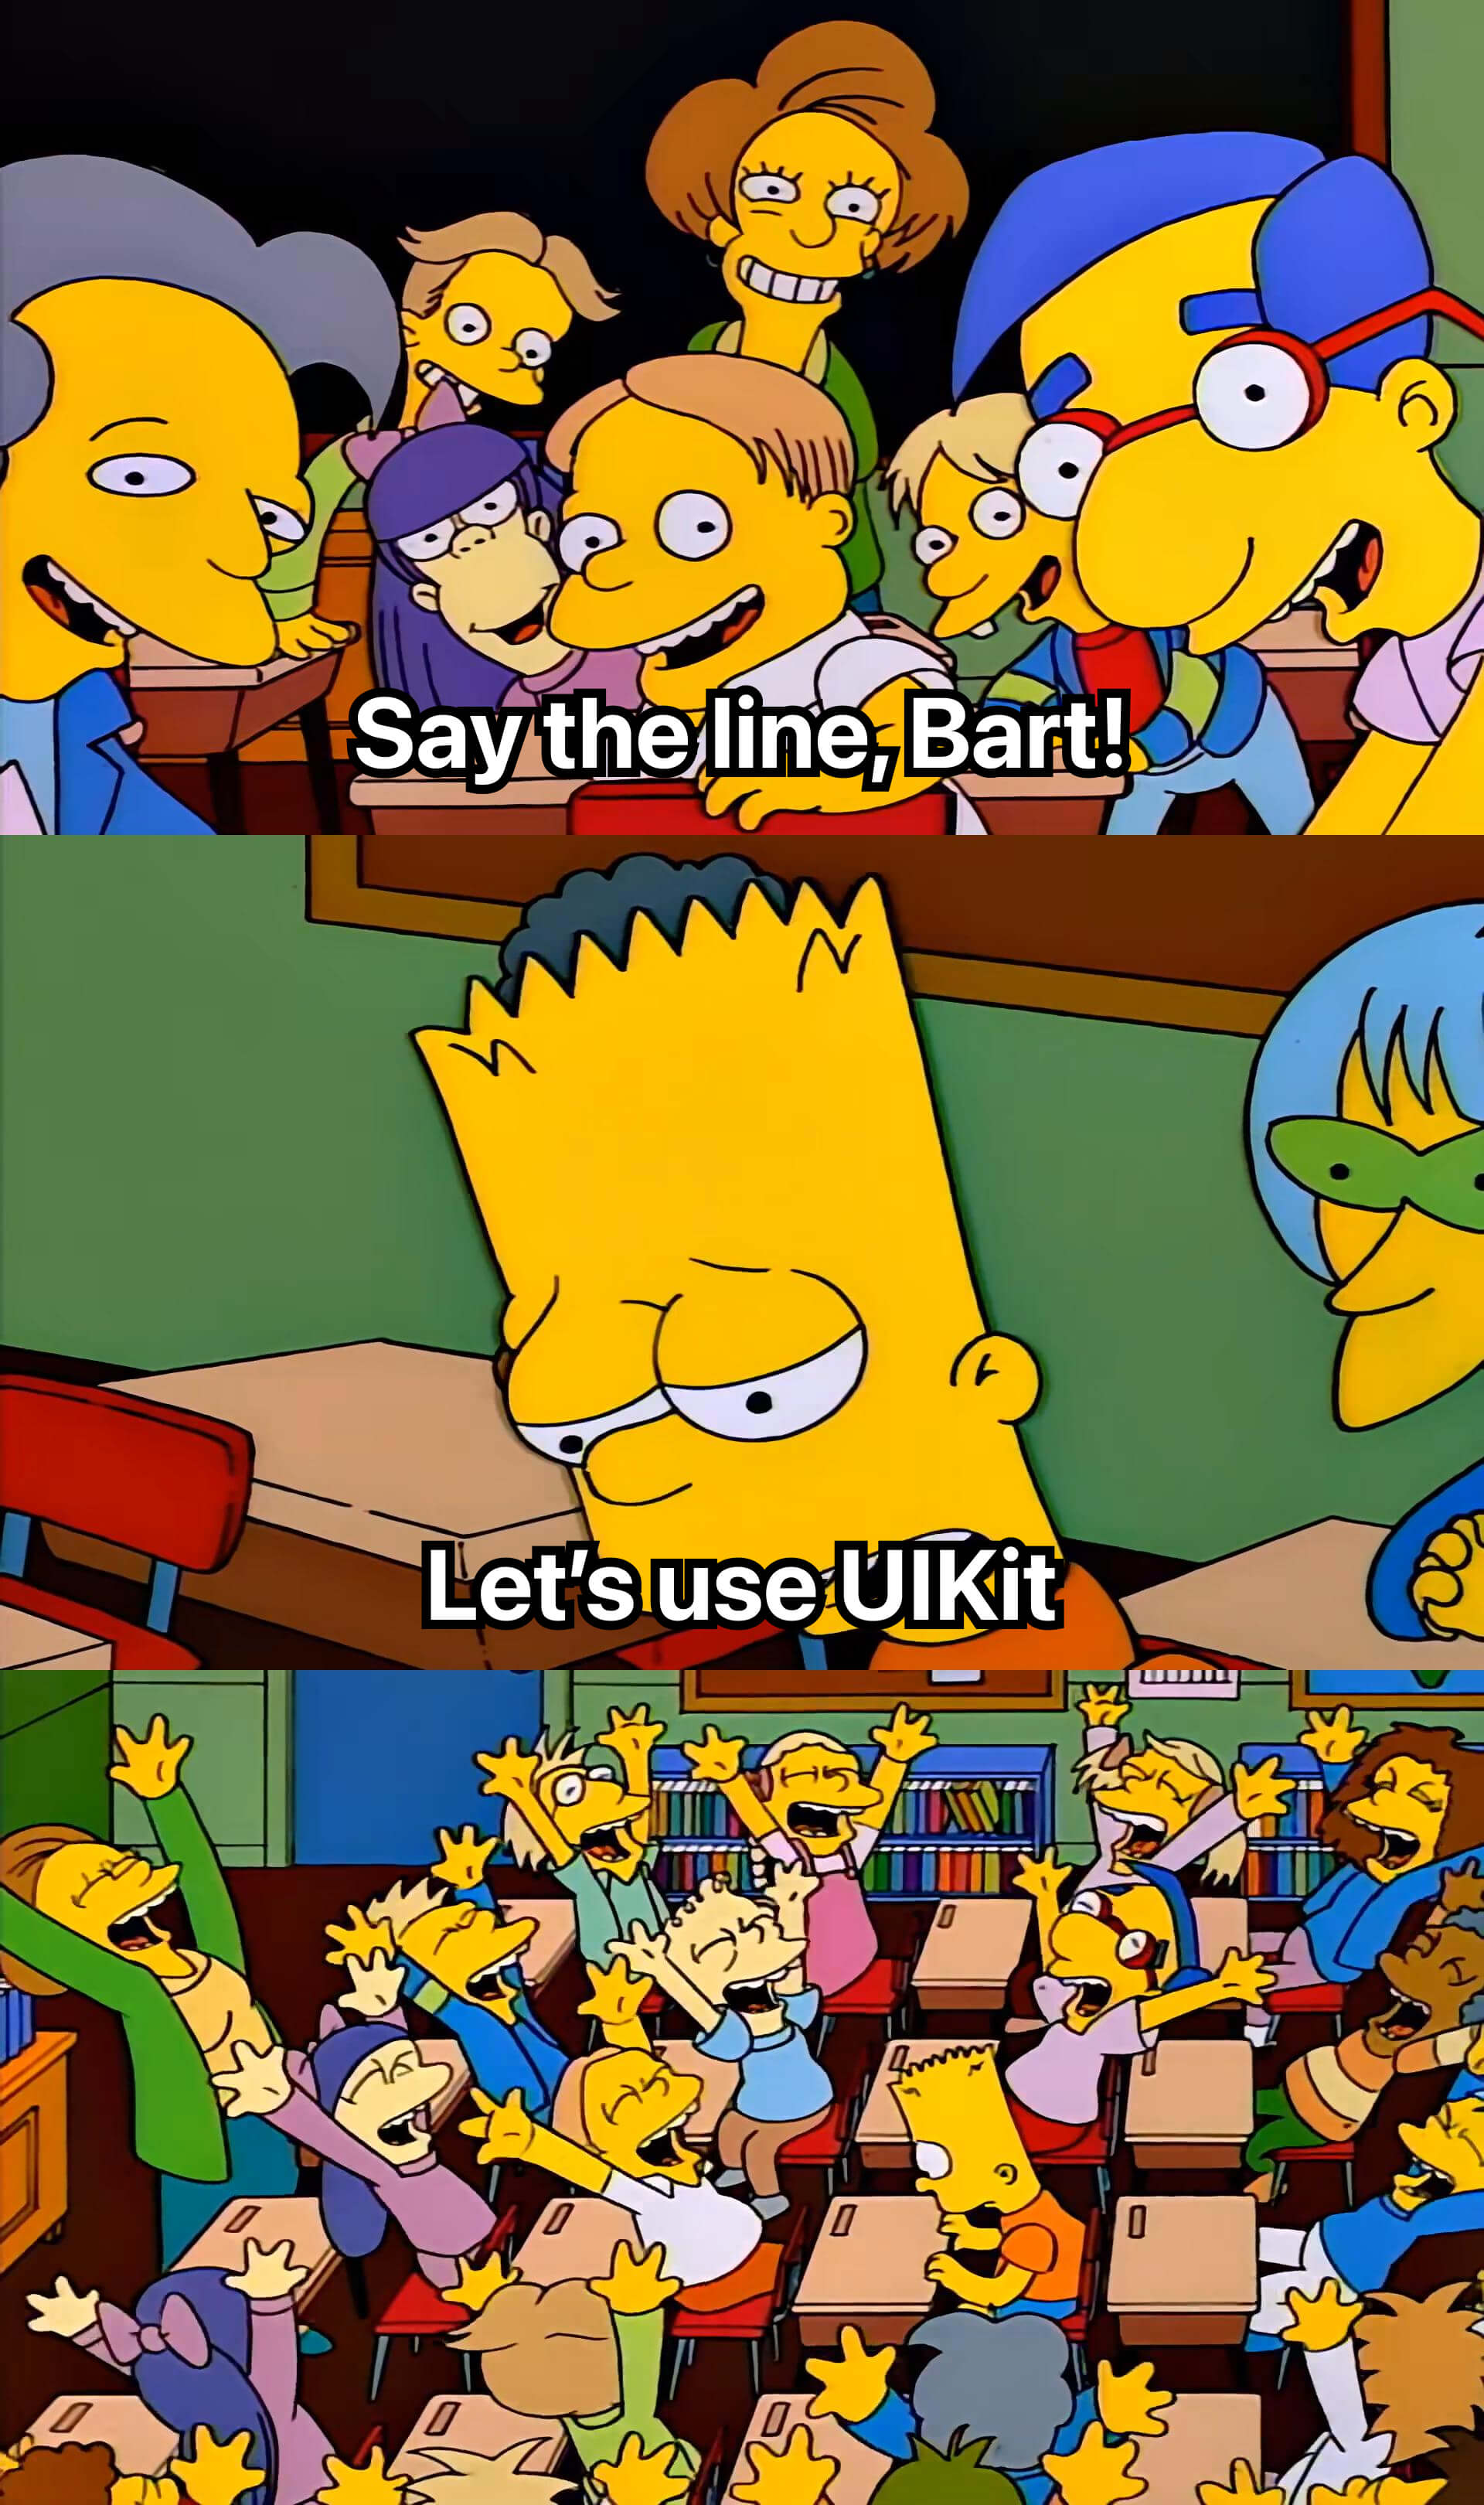 That Simpsons meme where they say 'Say the line, Bart!' but he responds 'Let's use UIKit' with much sadness